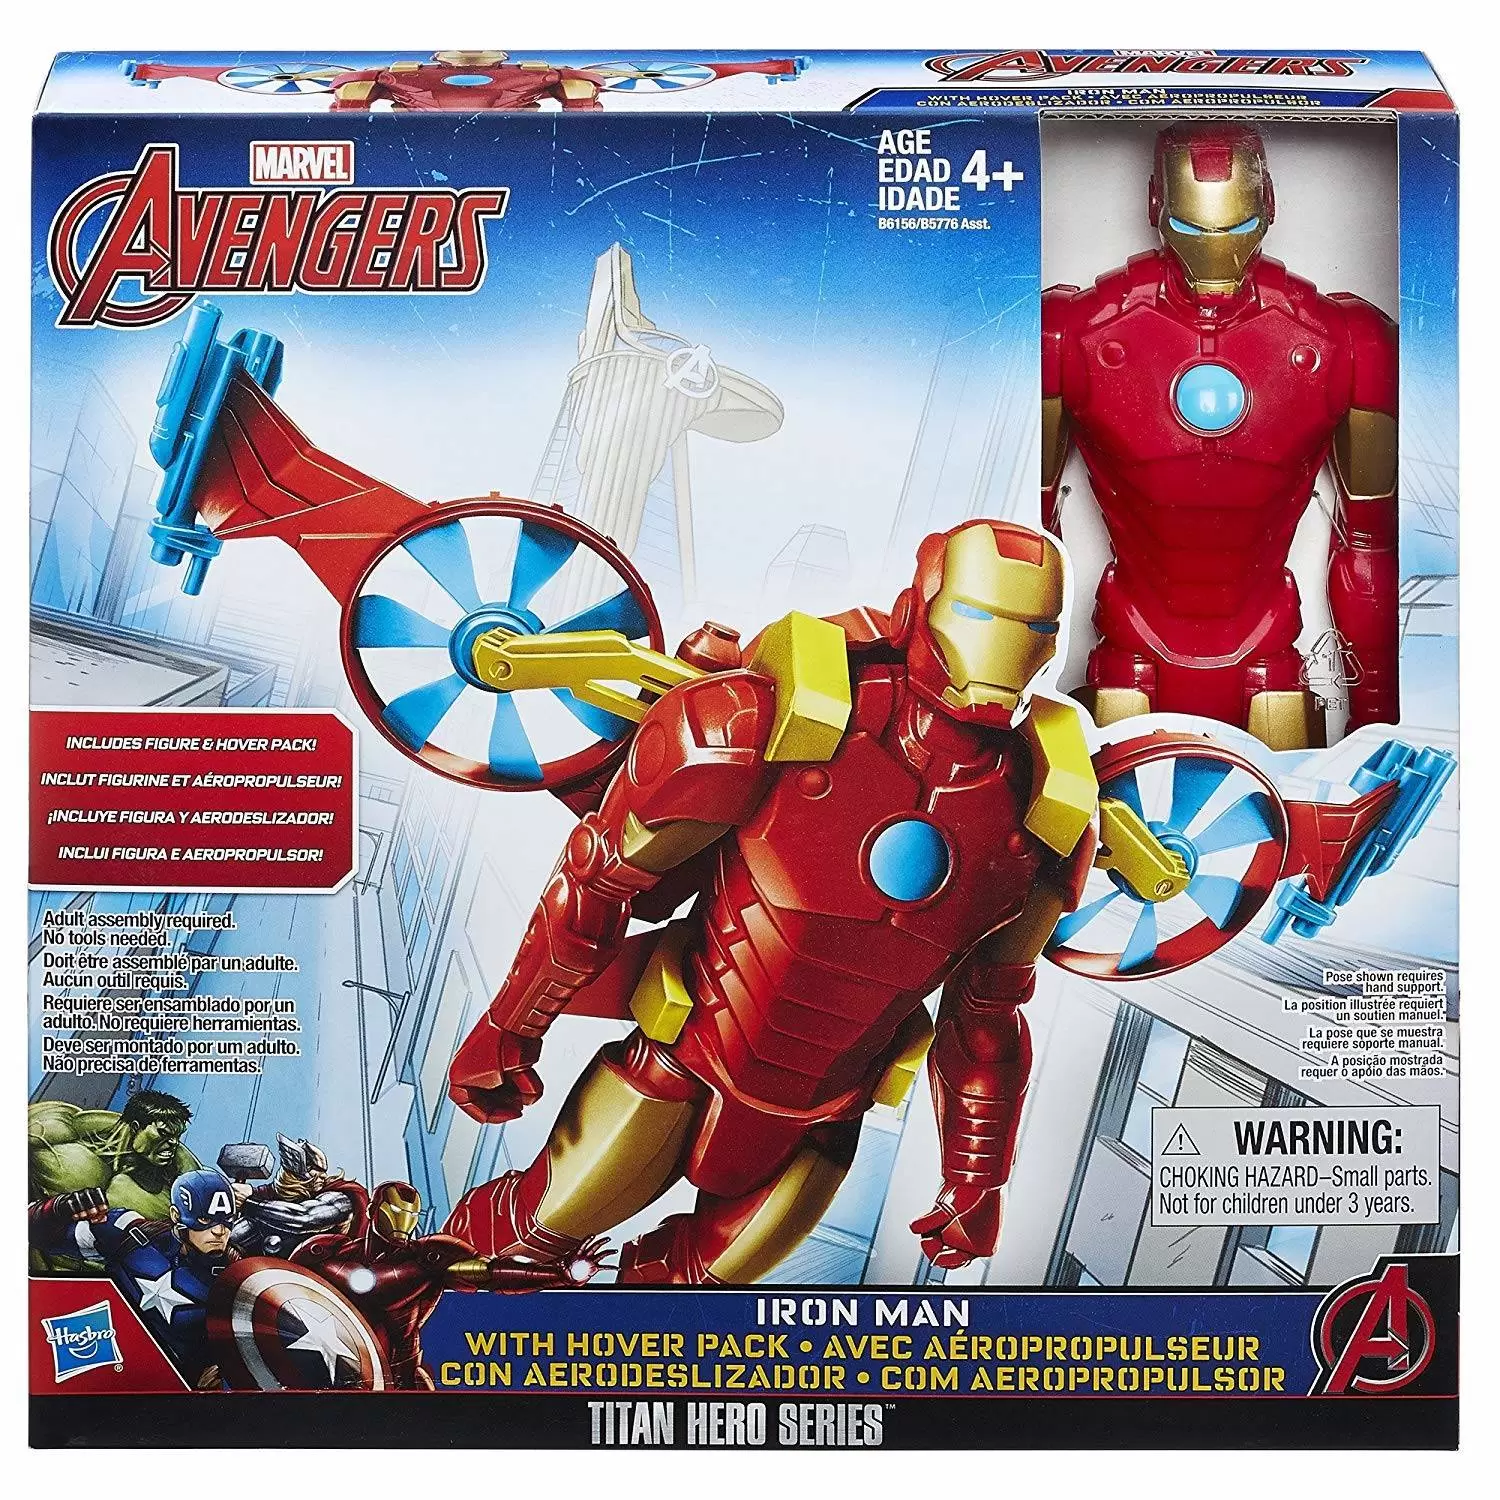 Titan Hero Series - Iron Man with Hover Pack - Avengers